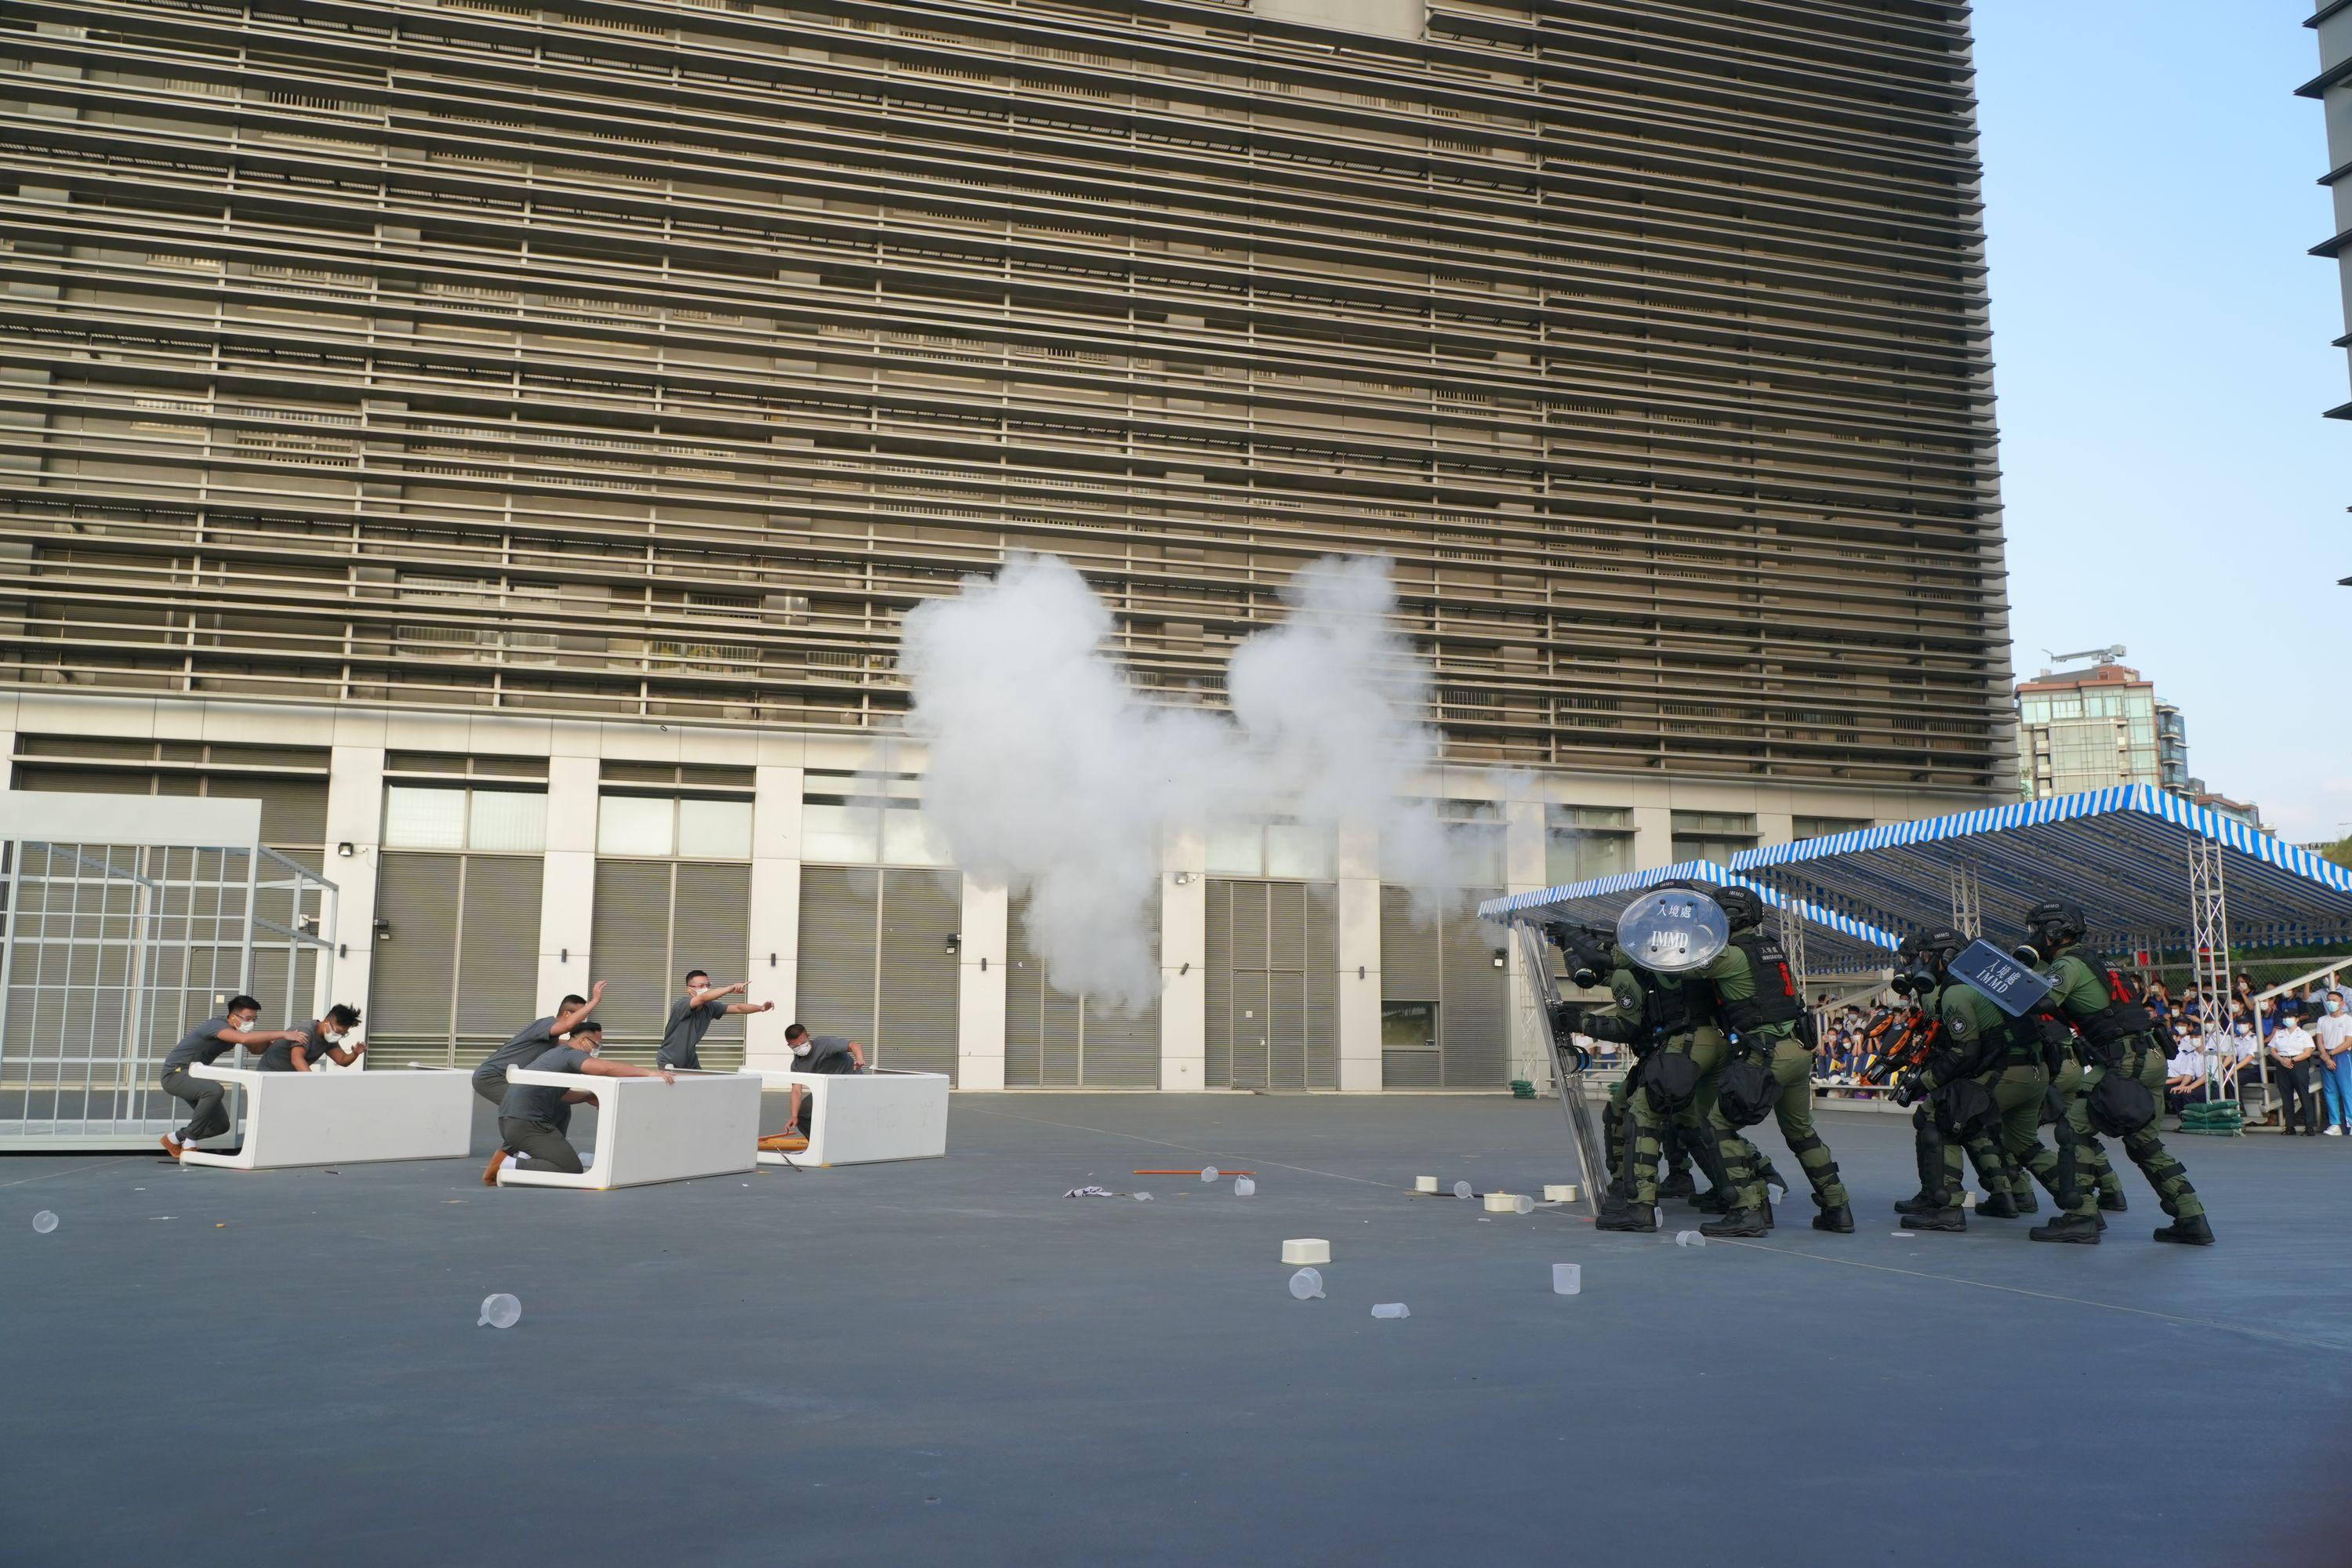 The Immigration Service Institute of Training and Development held an Open Day today (October 29). Photo shows the Emergency Response Team of the Castle Peak Bay Immigration Centre conducting a firearms and tactical demonstration.